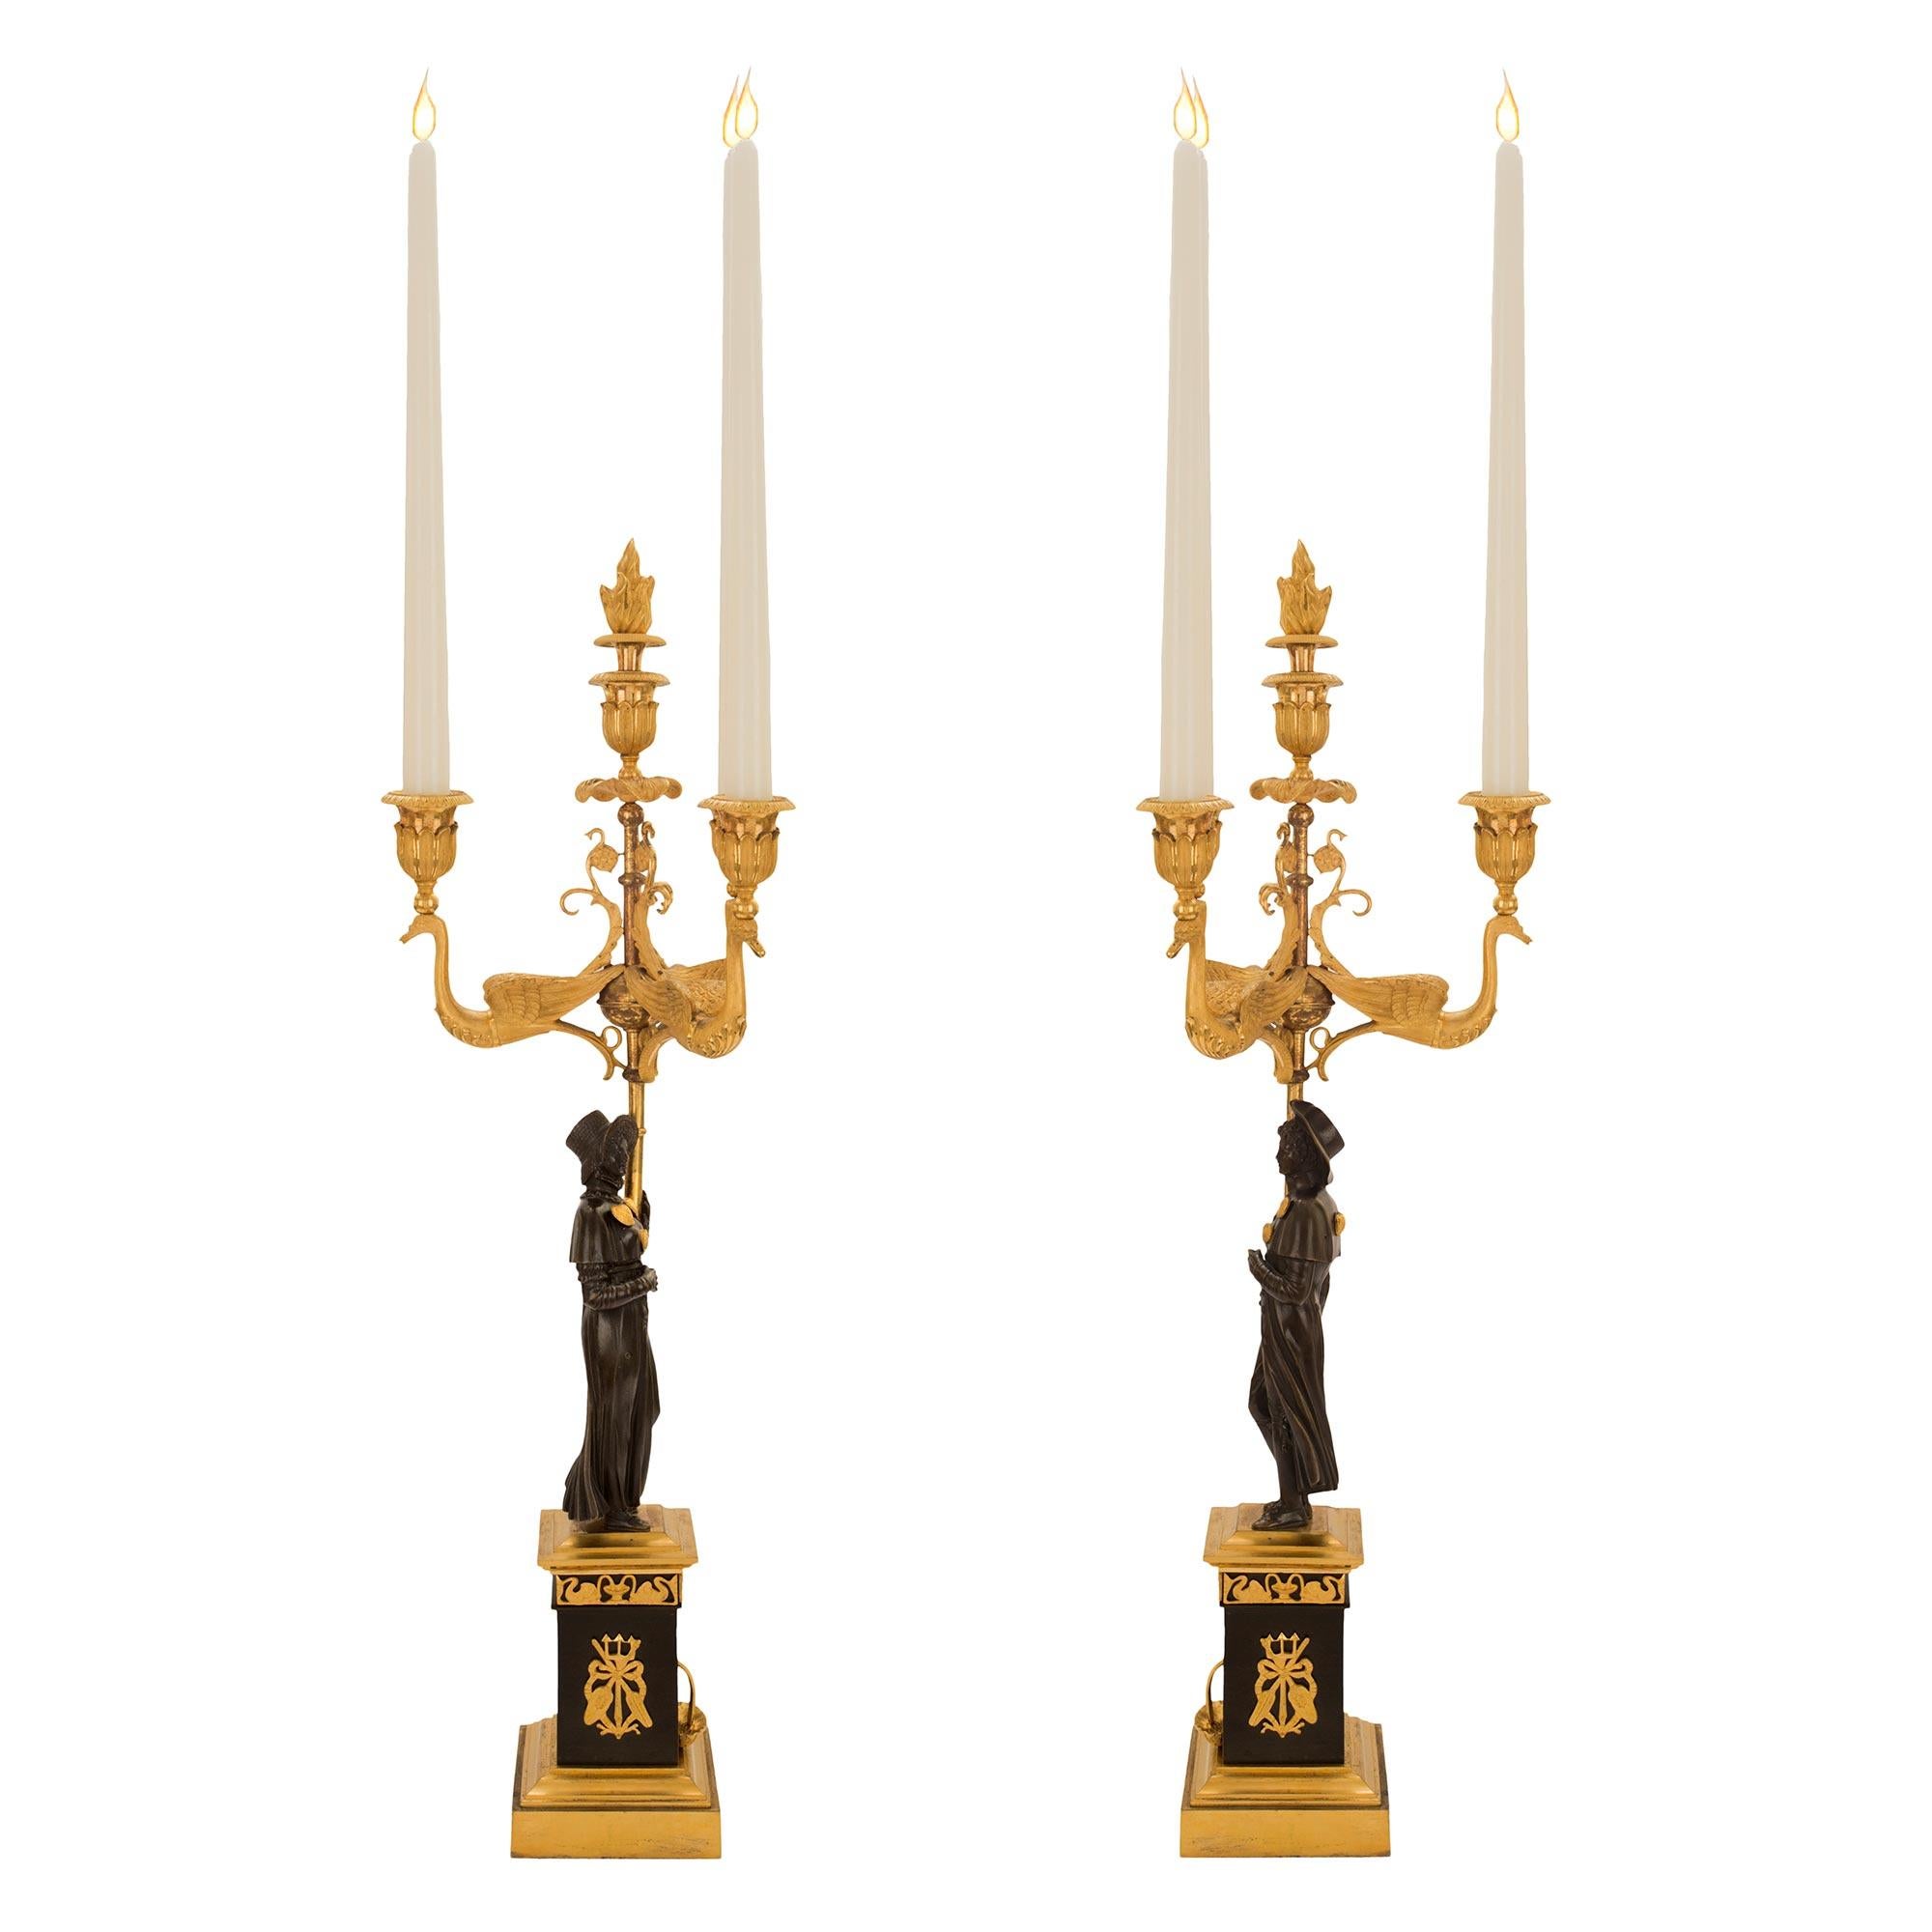 A high quality and stunning true pair of French 1st empire period, ca. 1810 patinated bronze and ormolu three light candelabras. Each candelabra is raised on a mottled square ormolu base. Above is a square bronze plinth decorated with ormolu